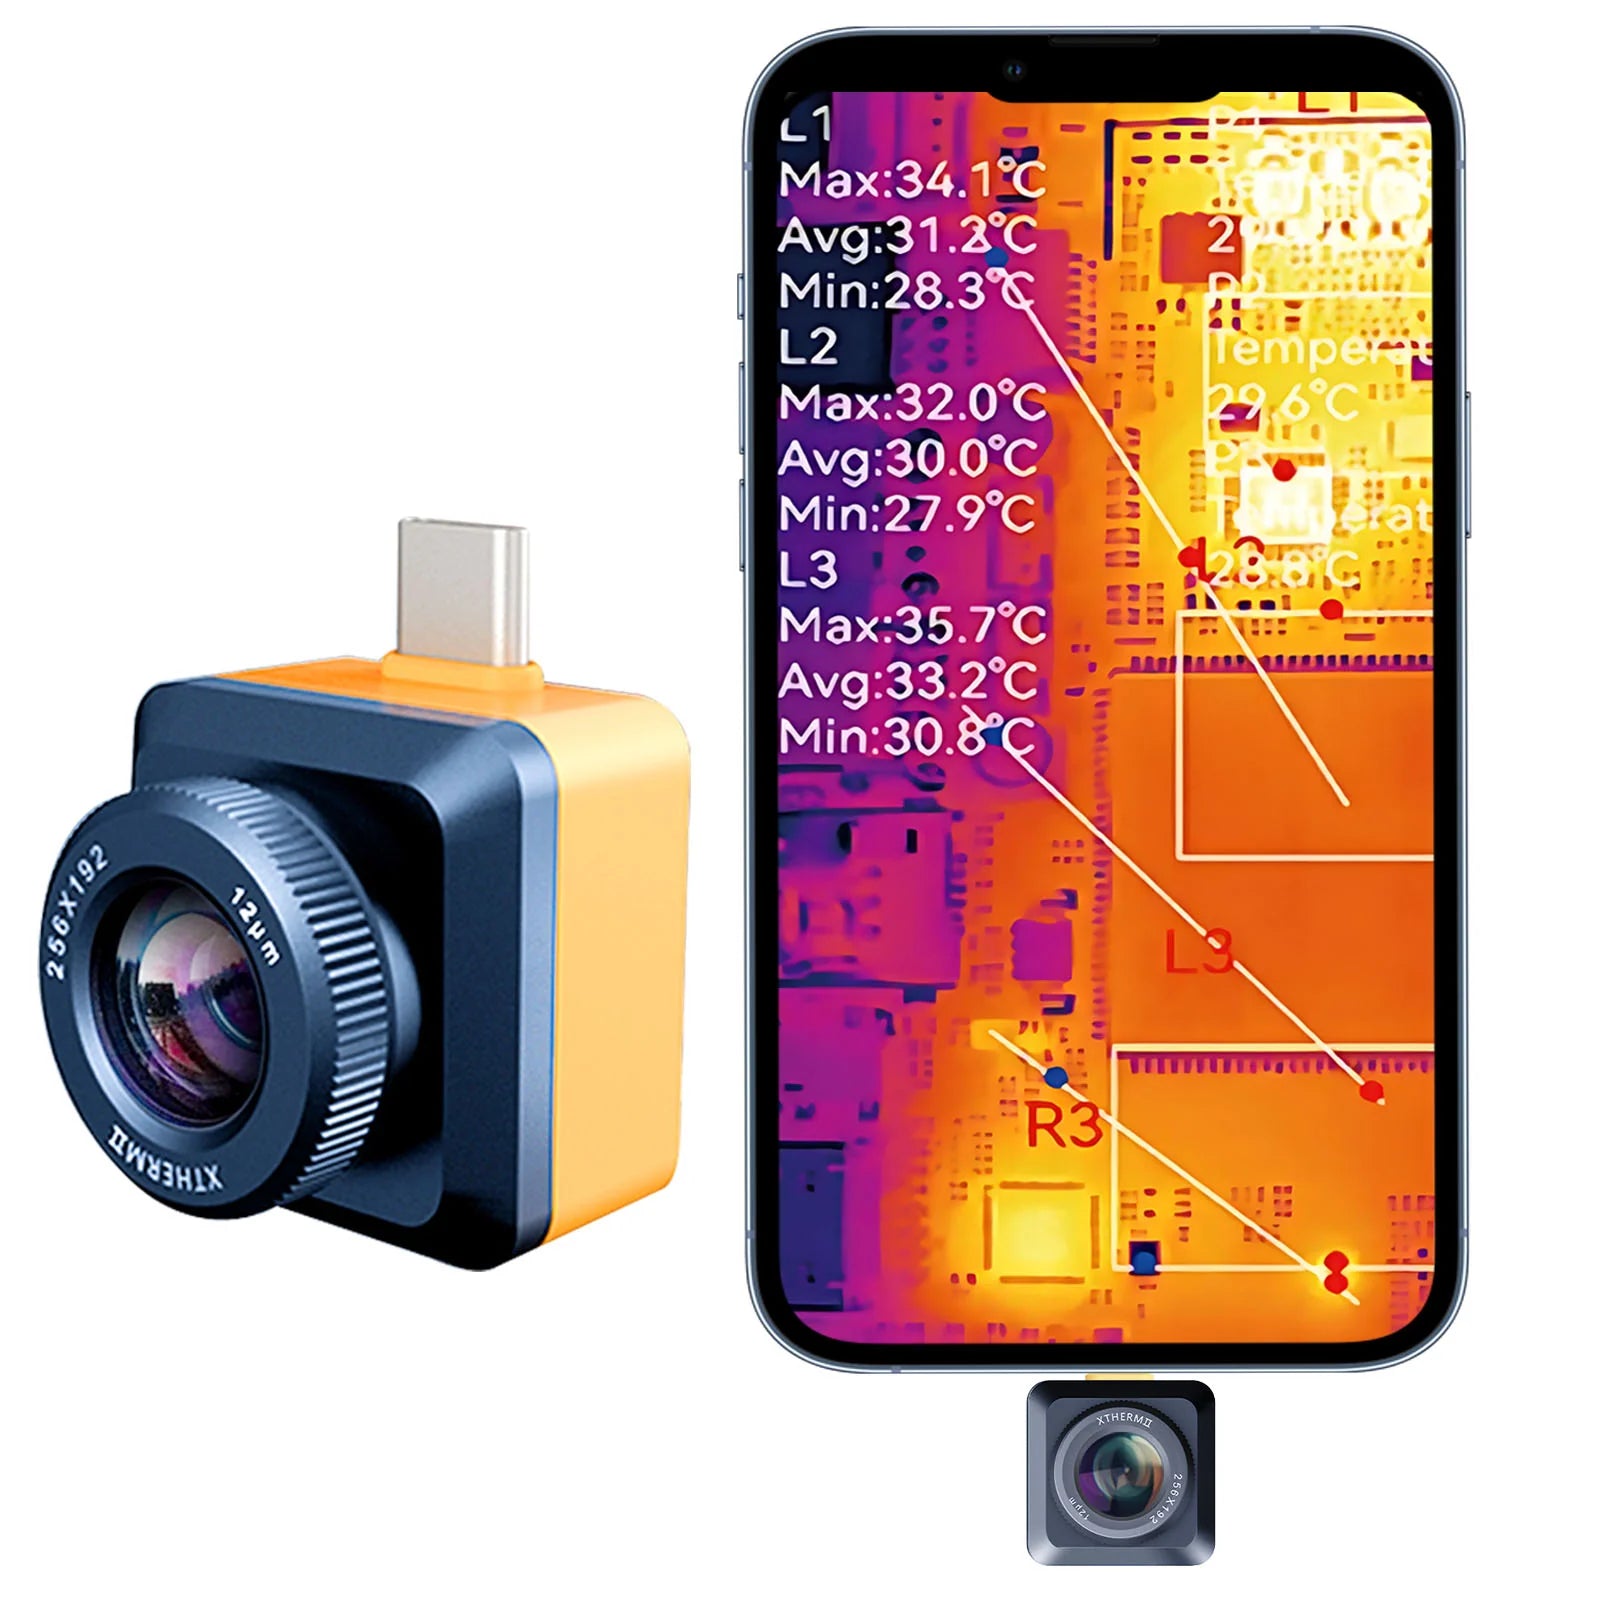 InfiRay Xinfrared P2 pro thermal camera detailed Review - Share